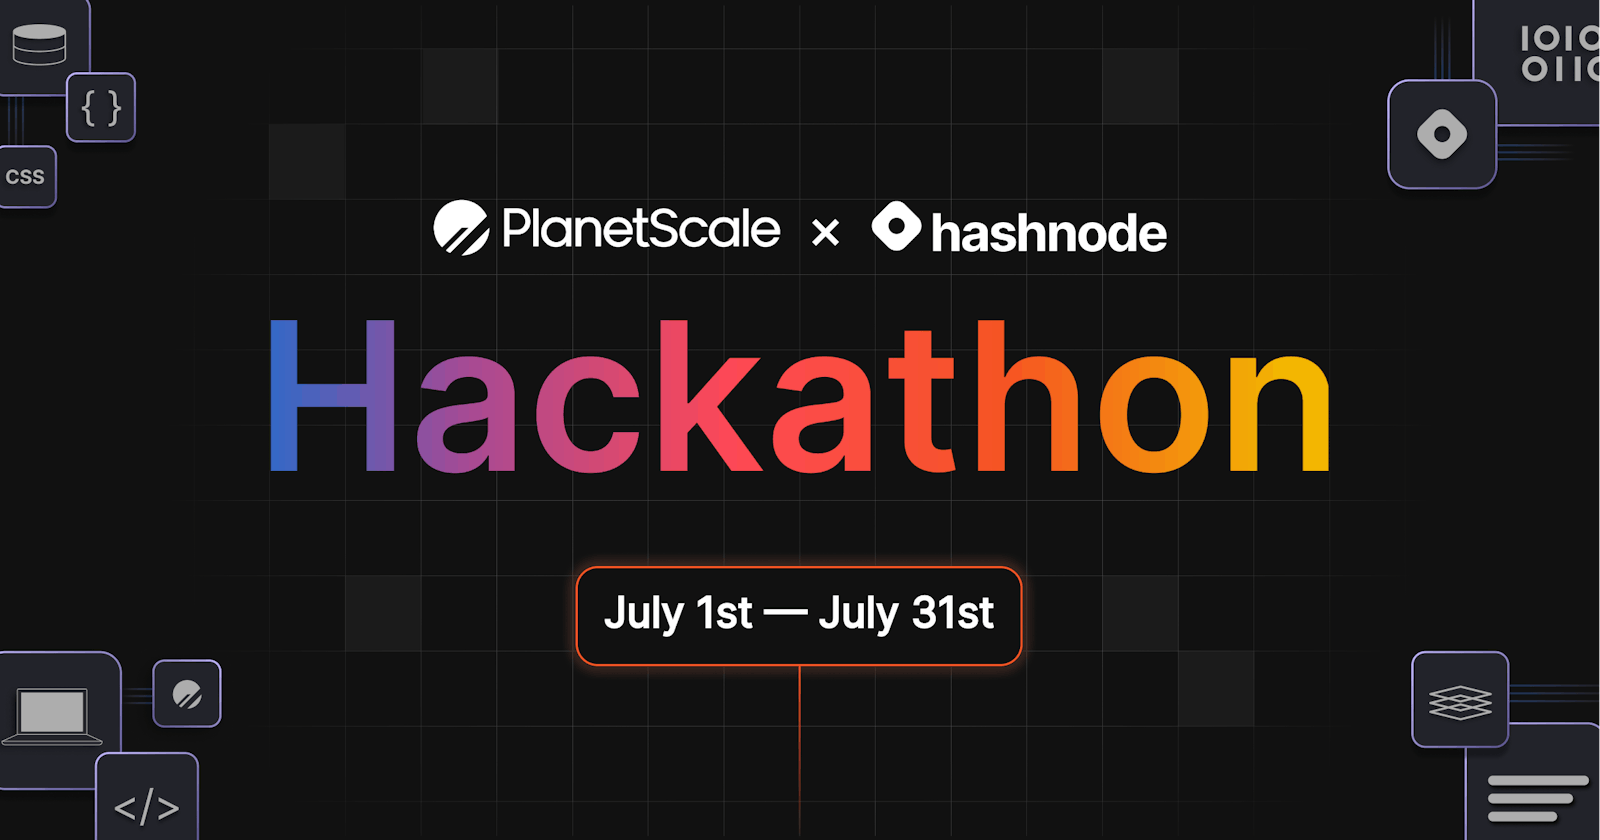 Build an Open Source app with PlanetScale in July, and compete for $20,000 in cash prizes and swags! 🎉